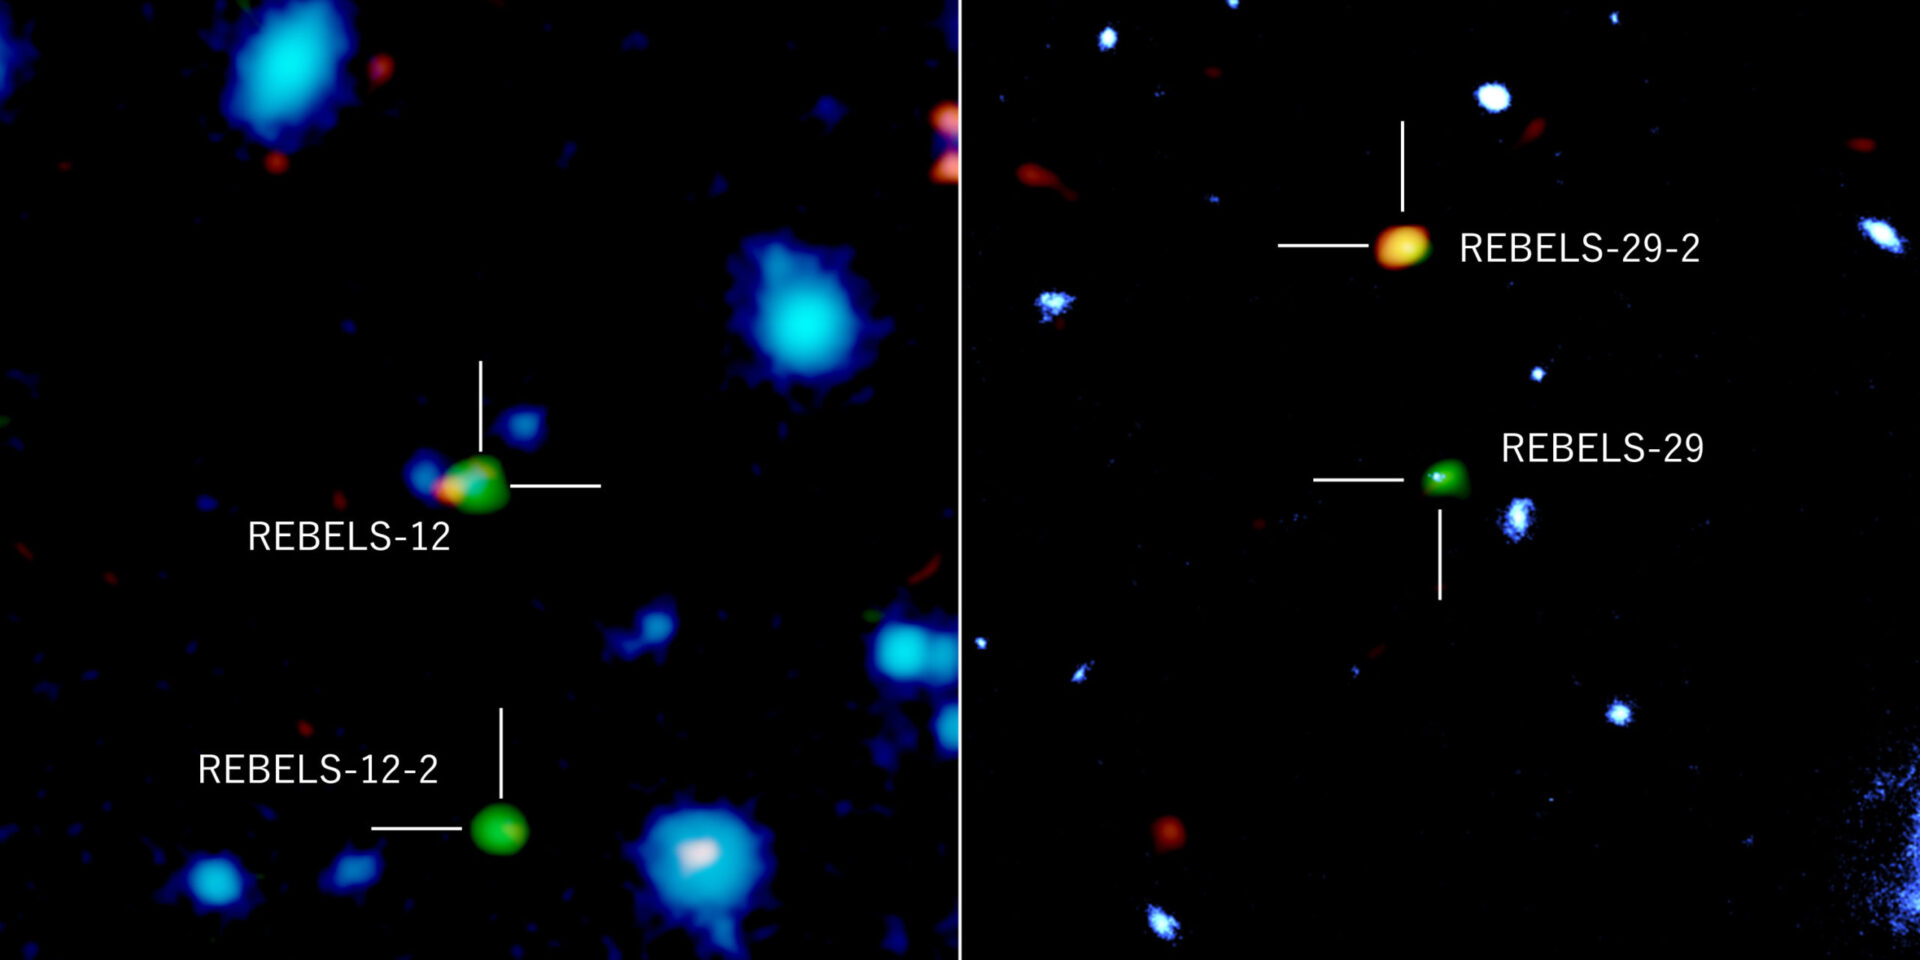 <p>Distant galaxies imaged with ALMA, the Hubble Space Telescope, and the European Southern Observatory’s VISTA telescope. Green and orange colors represent radiations from ionized carbon atoms and dust particles, respectively, observed with ALMA, and blue represents near-infrared radiation observed with VISTA and Hubble Space Telescopes.  REBELS-12 and REBELS-29 detected both near-infrared radiation and radiation from ionized carbon atoms and dust. On the other hand, REBELS-12-2 and REBELS-29-2 have not been detected in the near-infrared, which suggests that these galaxies are deeply buried in dust. Credit: ALMA (ESO/NAOJ/NRAO), NASA/ESA Hubble Space Telescope, ESO, Fudamoto et al.</p>
